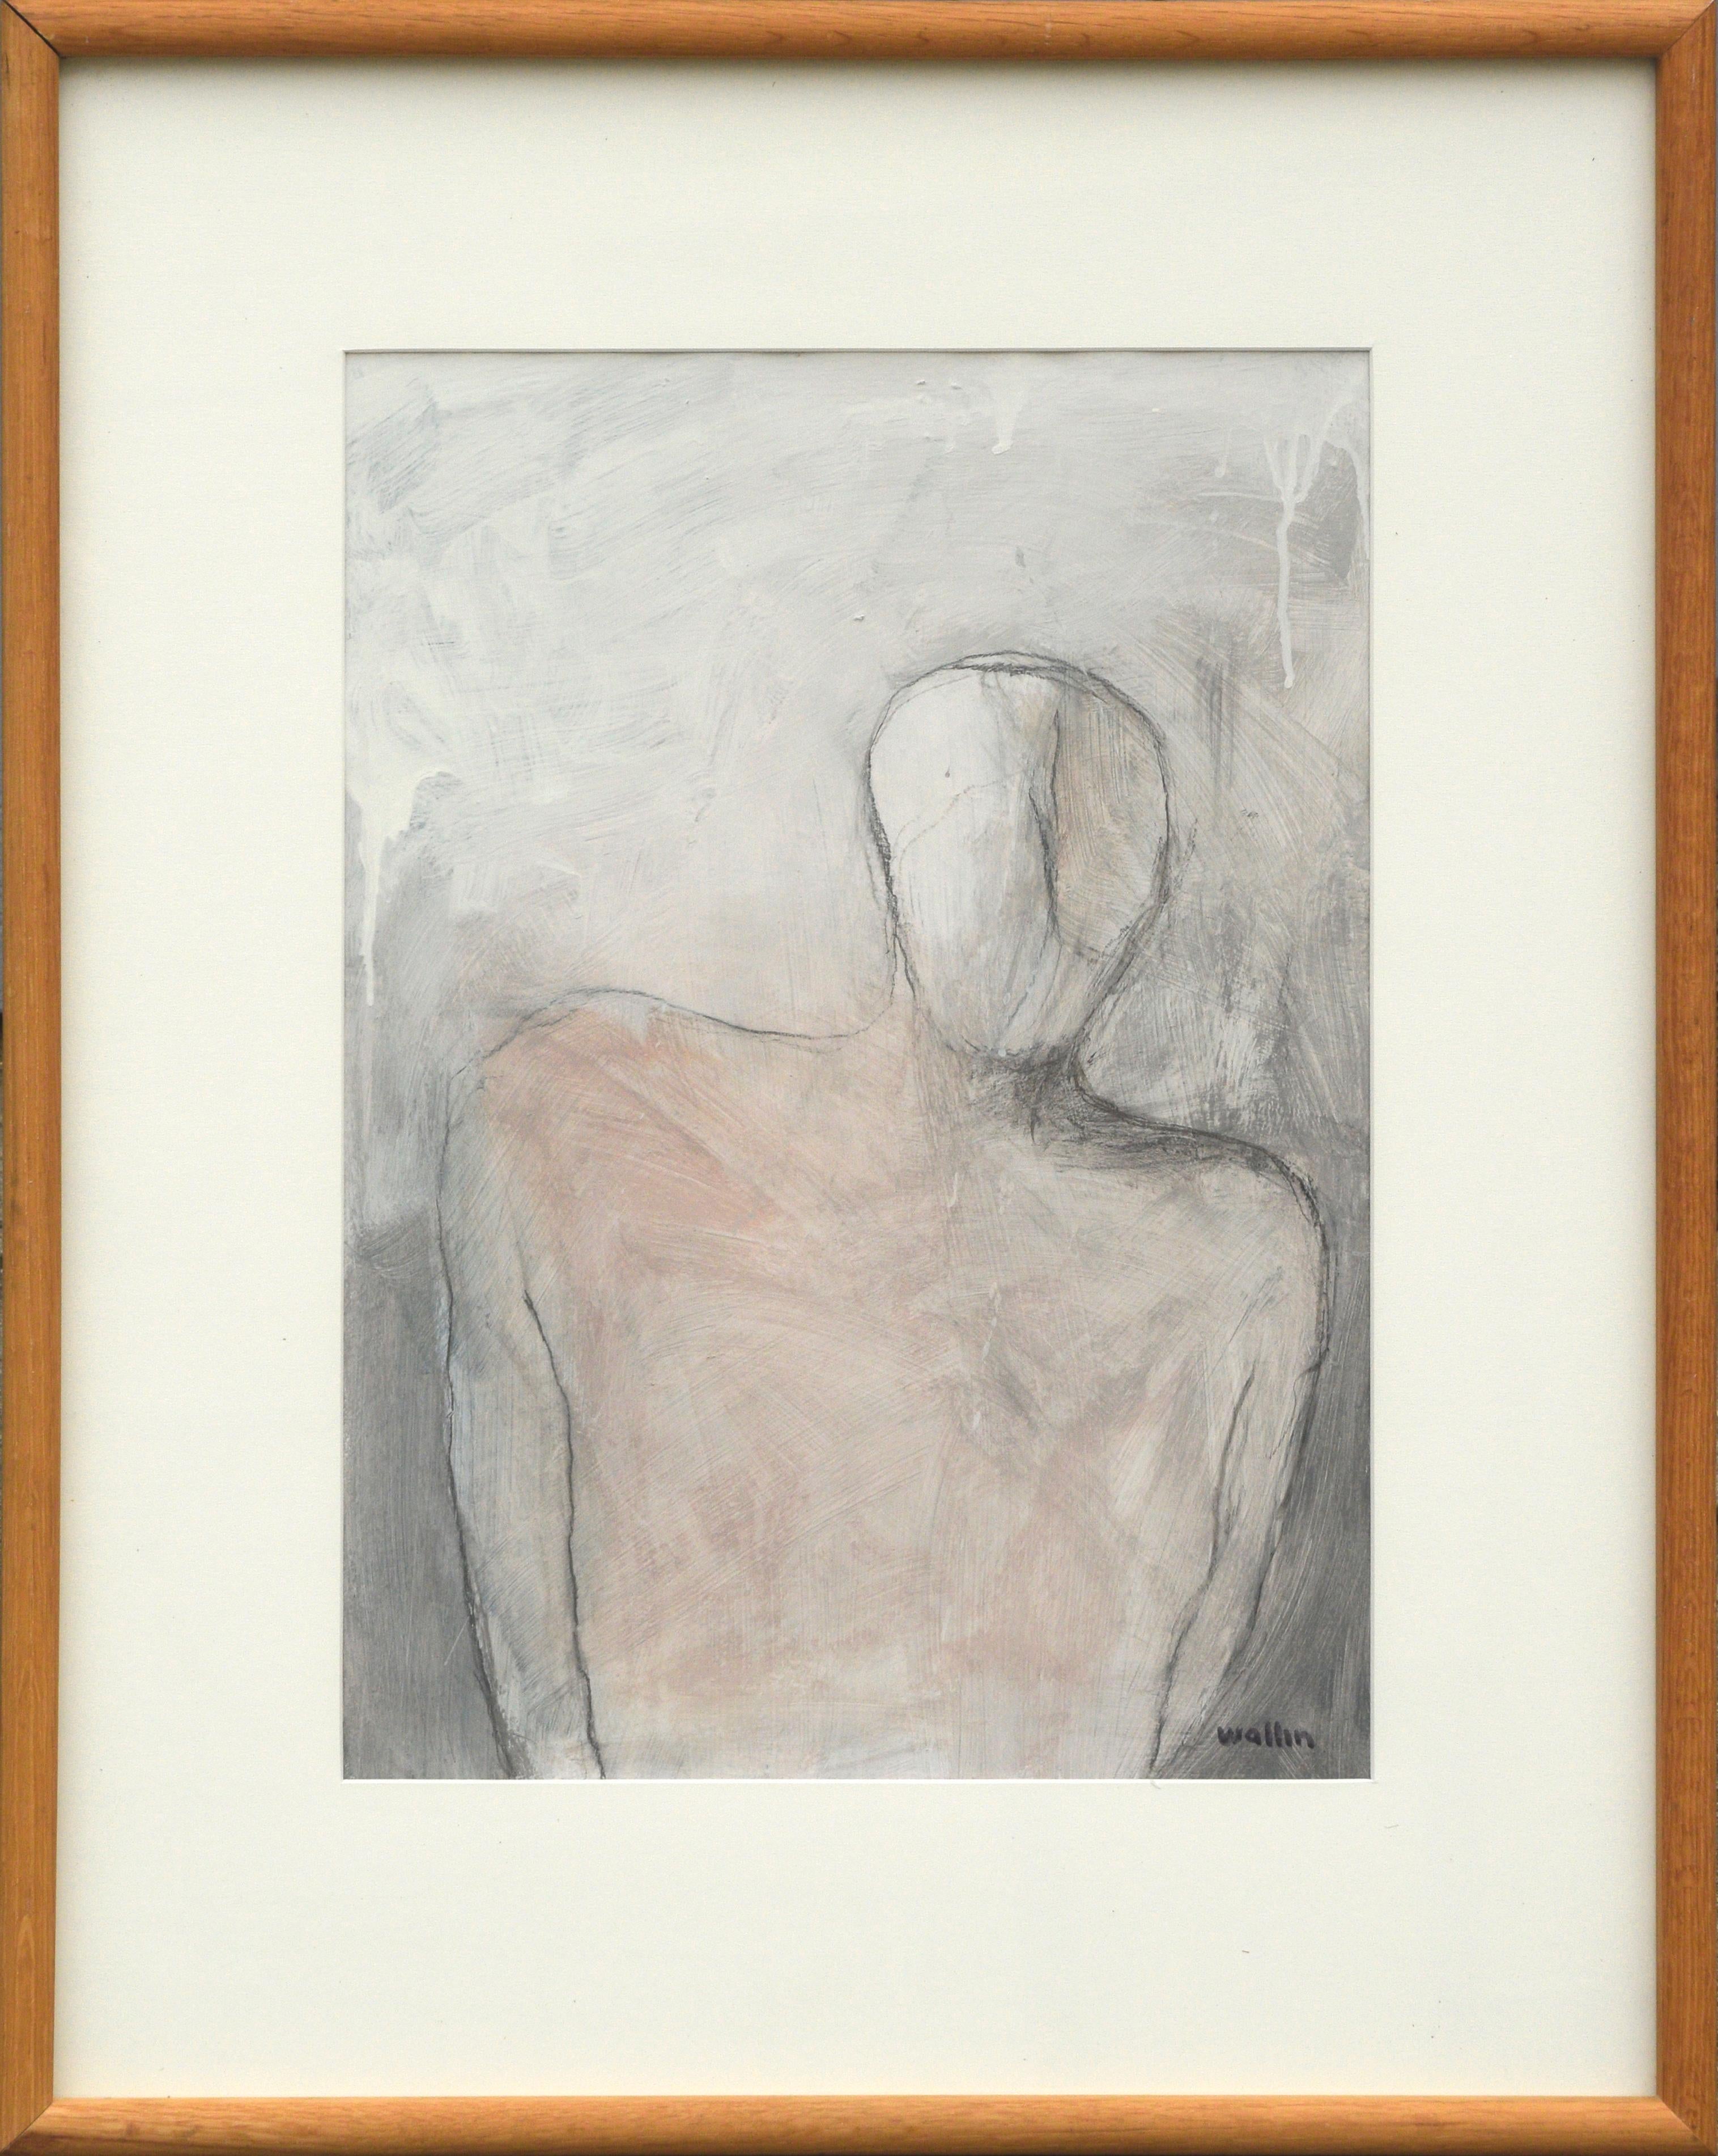 Modernist Abstract Silhouette of a Figure in White